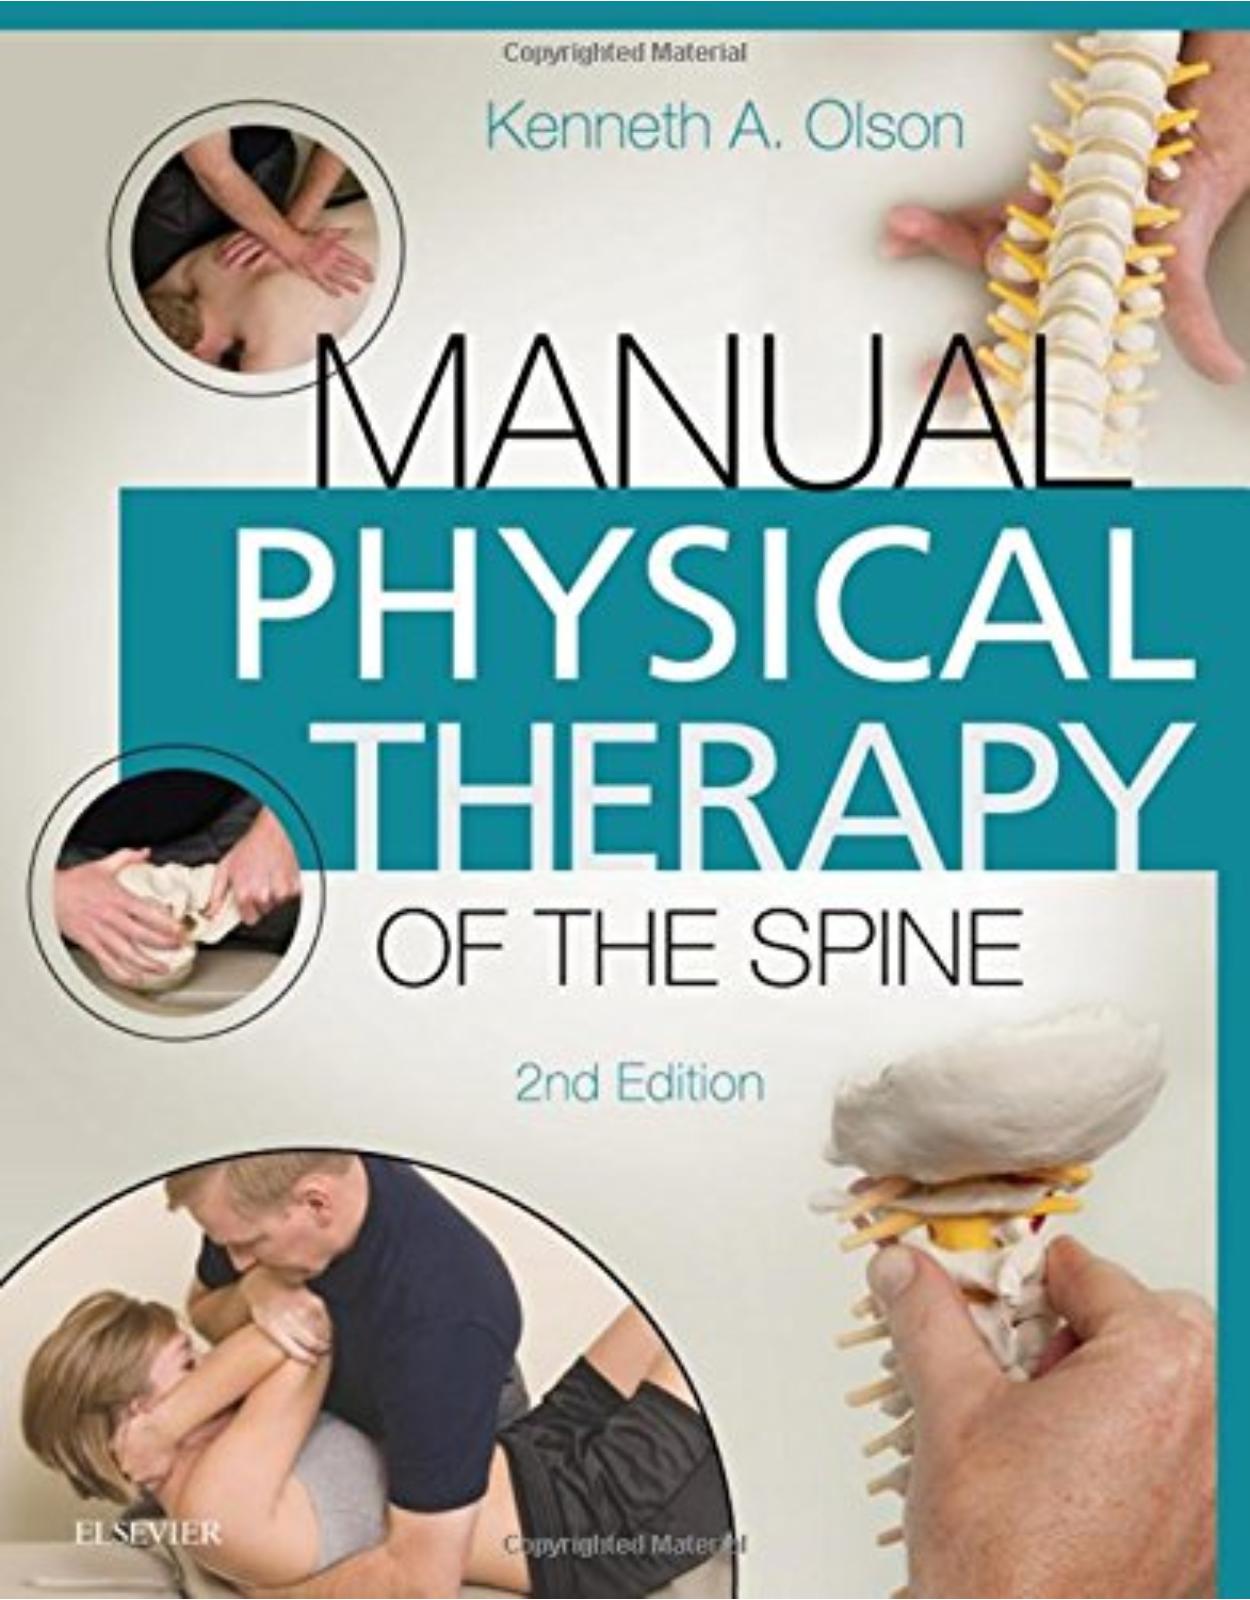 Manual Physical Therapy of the Spine, 2nd Edition